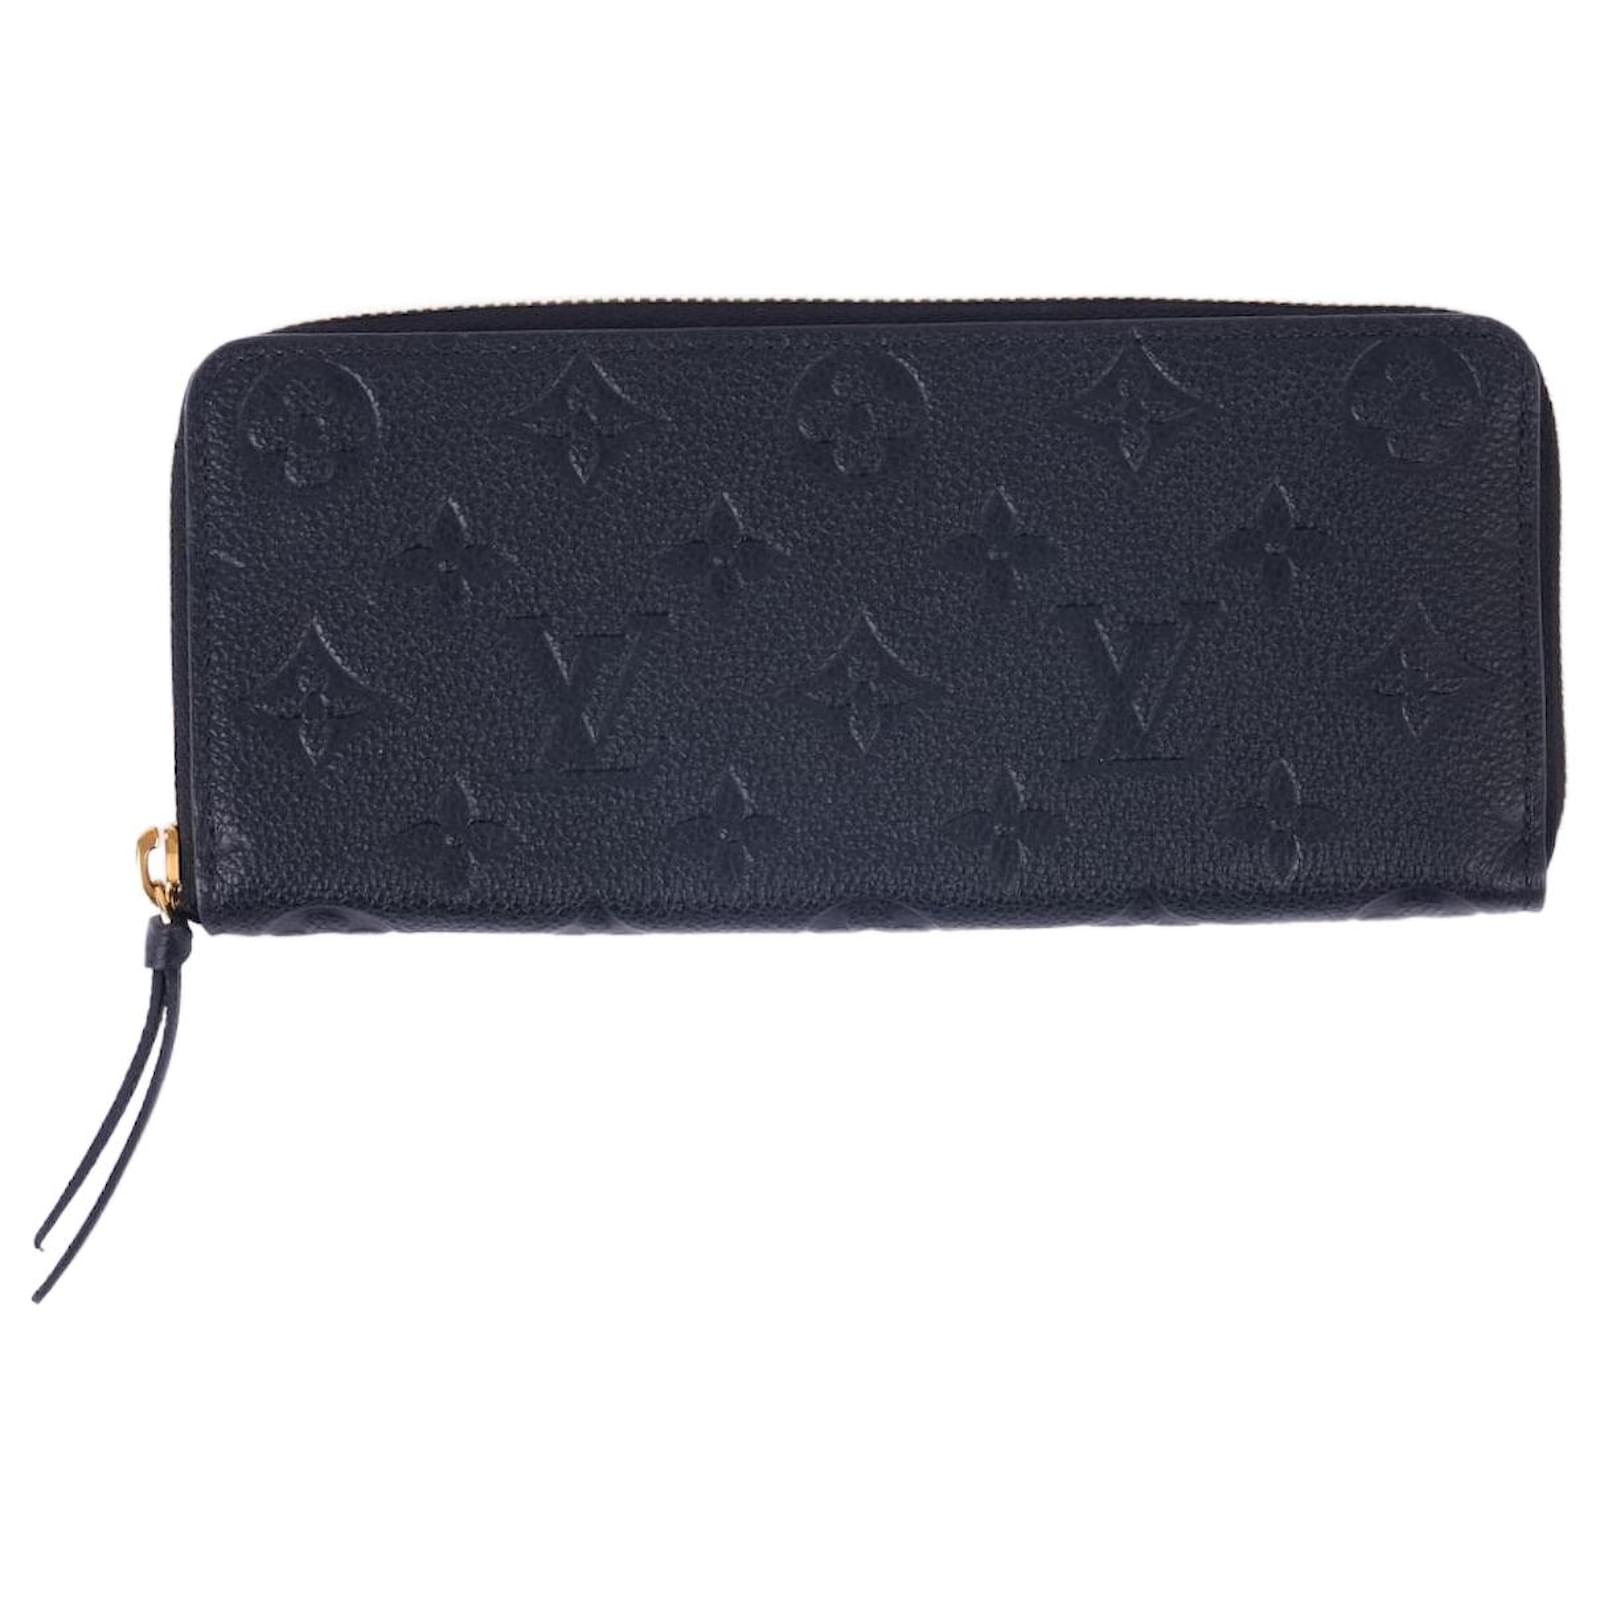 Zippy Wallet Monogram Empreinte Leather - Wallets and Small Leather Goods  M69034